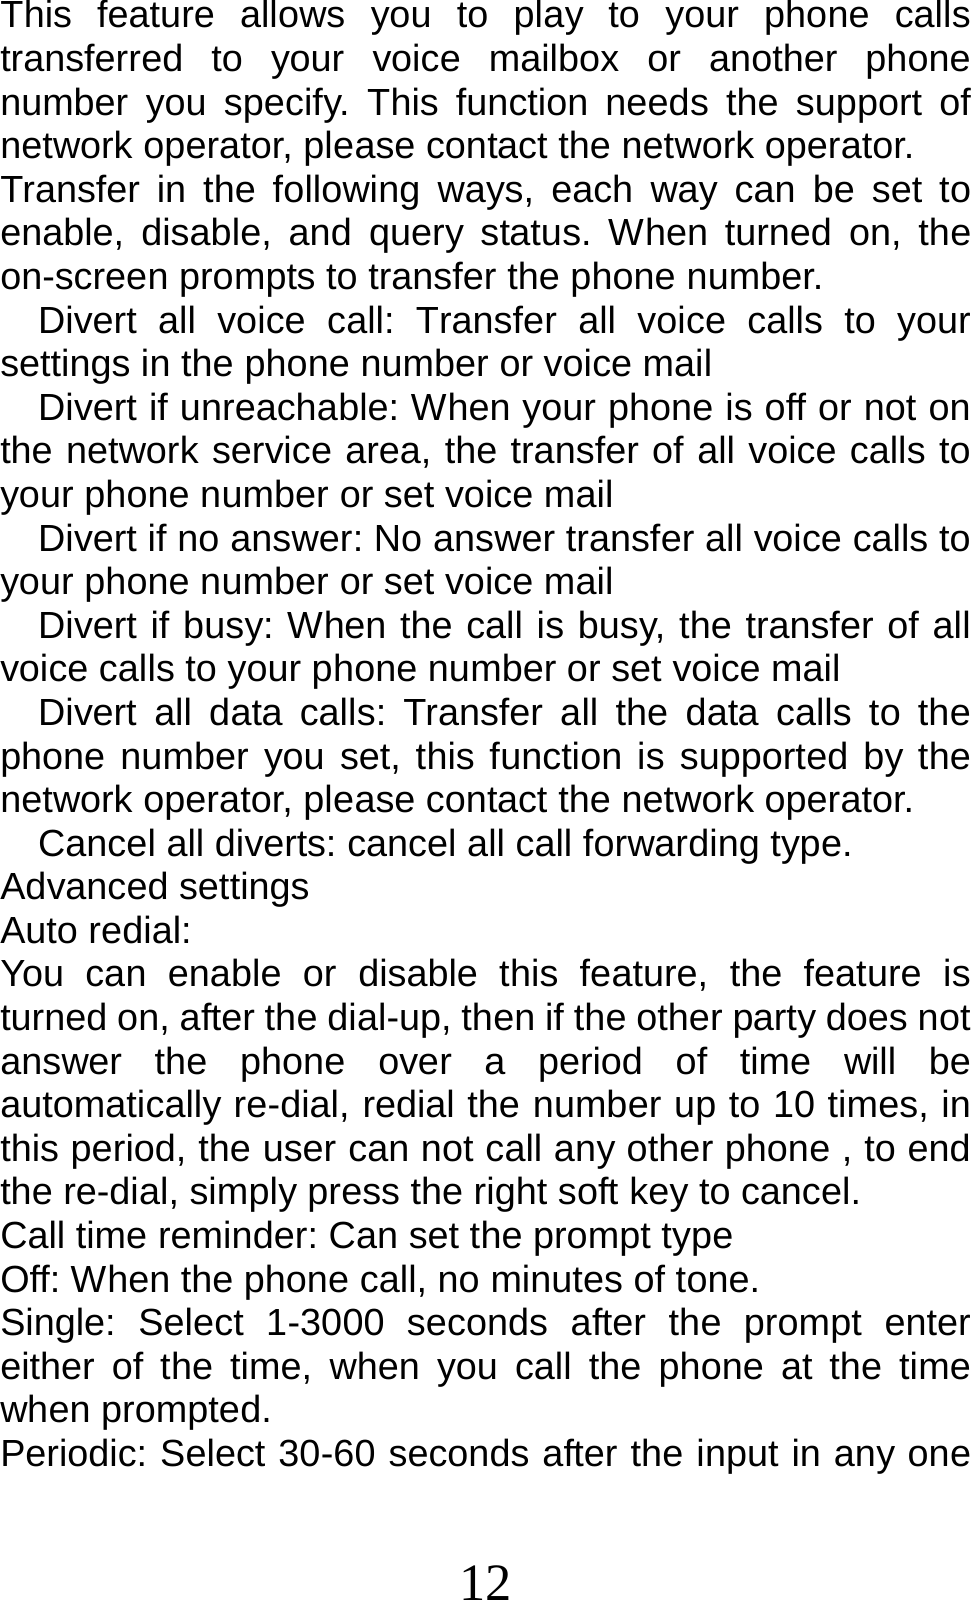 12 This feature allows you to play to your phone calls transferred to your voice mailbox or another phone number you specify. This function needs the support of network operator, please contact the network operator.   Transfer in the following ways, each way can be set to enable, disable, and query status. When turned on, the on-screen prompts to transfer the phone number.   Divert all voice call: Transfer all voice calls to your settings in the phone number or voice mail      Divert if unreachable: When your phone is off or not on the network service area, the transfer of all voice calls to your phone number or set voice mail     Divert if no answer: No answer transfer all voice calls to your phone number or set voice mail   Divert if busy: When the call is busy, the transfer of all voice calls to your phone number or set voice mail   Divert all data calls: Transfer all the data calls to the phone number you set, this function is supported by the network operator, please contact the network operator.     Cancel all diverts: cancel all call forwarding type. Advanced settings Auto redial: You can enable or disable this feature, the feature is turned on, after the dial-up, then if the other party does not answer the phone over a period of time will be automatically re-dial, redial the number up to 10 times, in this period, the user can not call any other phone , to end the re-dial, simply press the right soft key to cancel. Call time reminder: Can set the prompt type   Off: When the phone call, no minutes of tone.   Single: Select 1-3000 seconds after the prompt enter either of the time, when you call the phone at the time when prompted.   Periodic: Select 30-60 seconds after the input in any one 